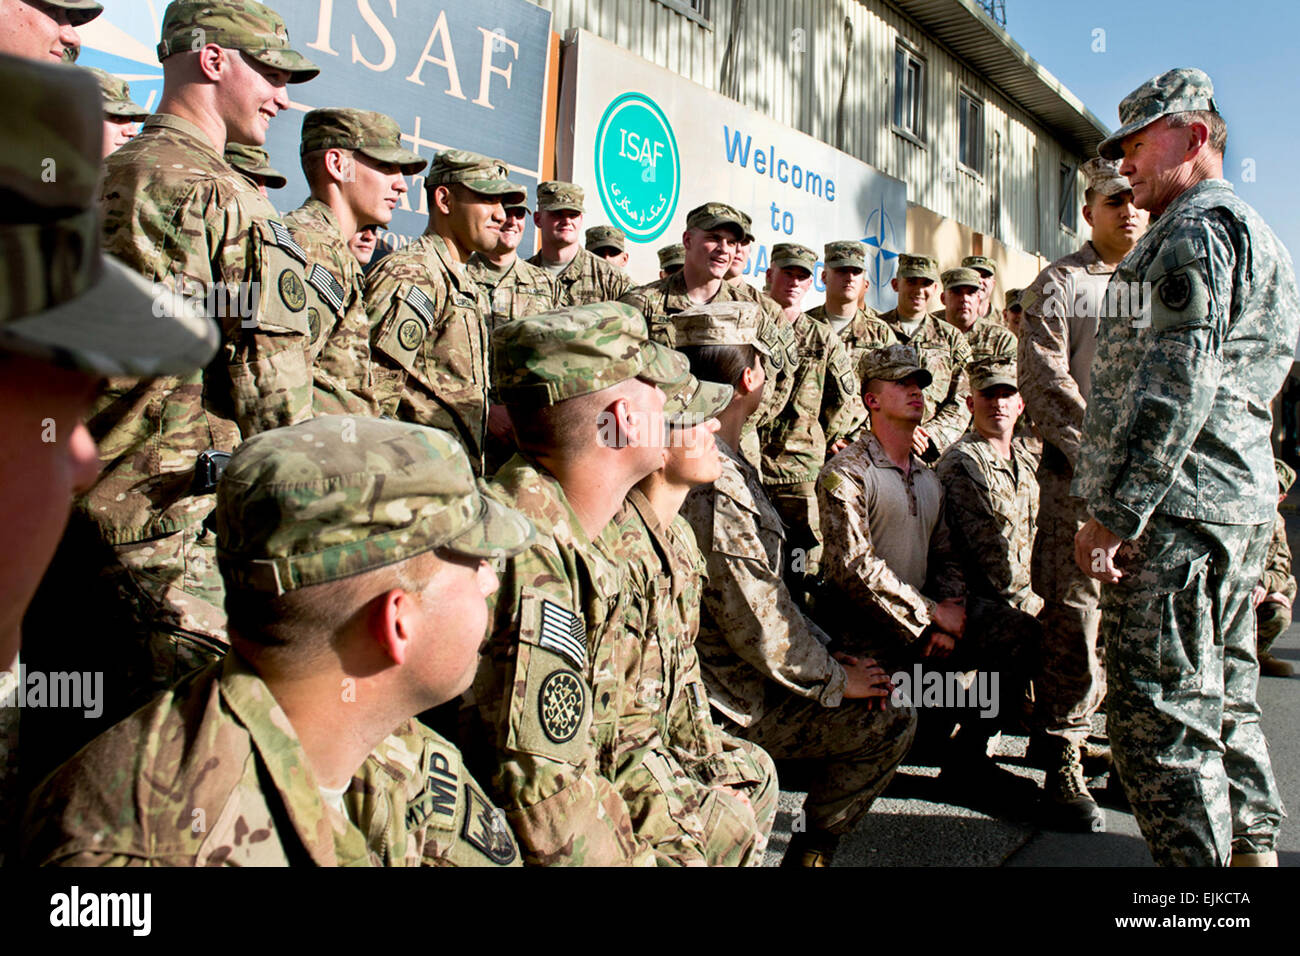 Chairman of the Joint Chiefs of Staff General Martin E. Dempsey talks with Soldiers and Marines stationed at ISAF Headquarters and Camp Eggers in Kabul, Afghanistan on Jul 20, 2013.  DOD  D. Myles Cullen Stock Photo